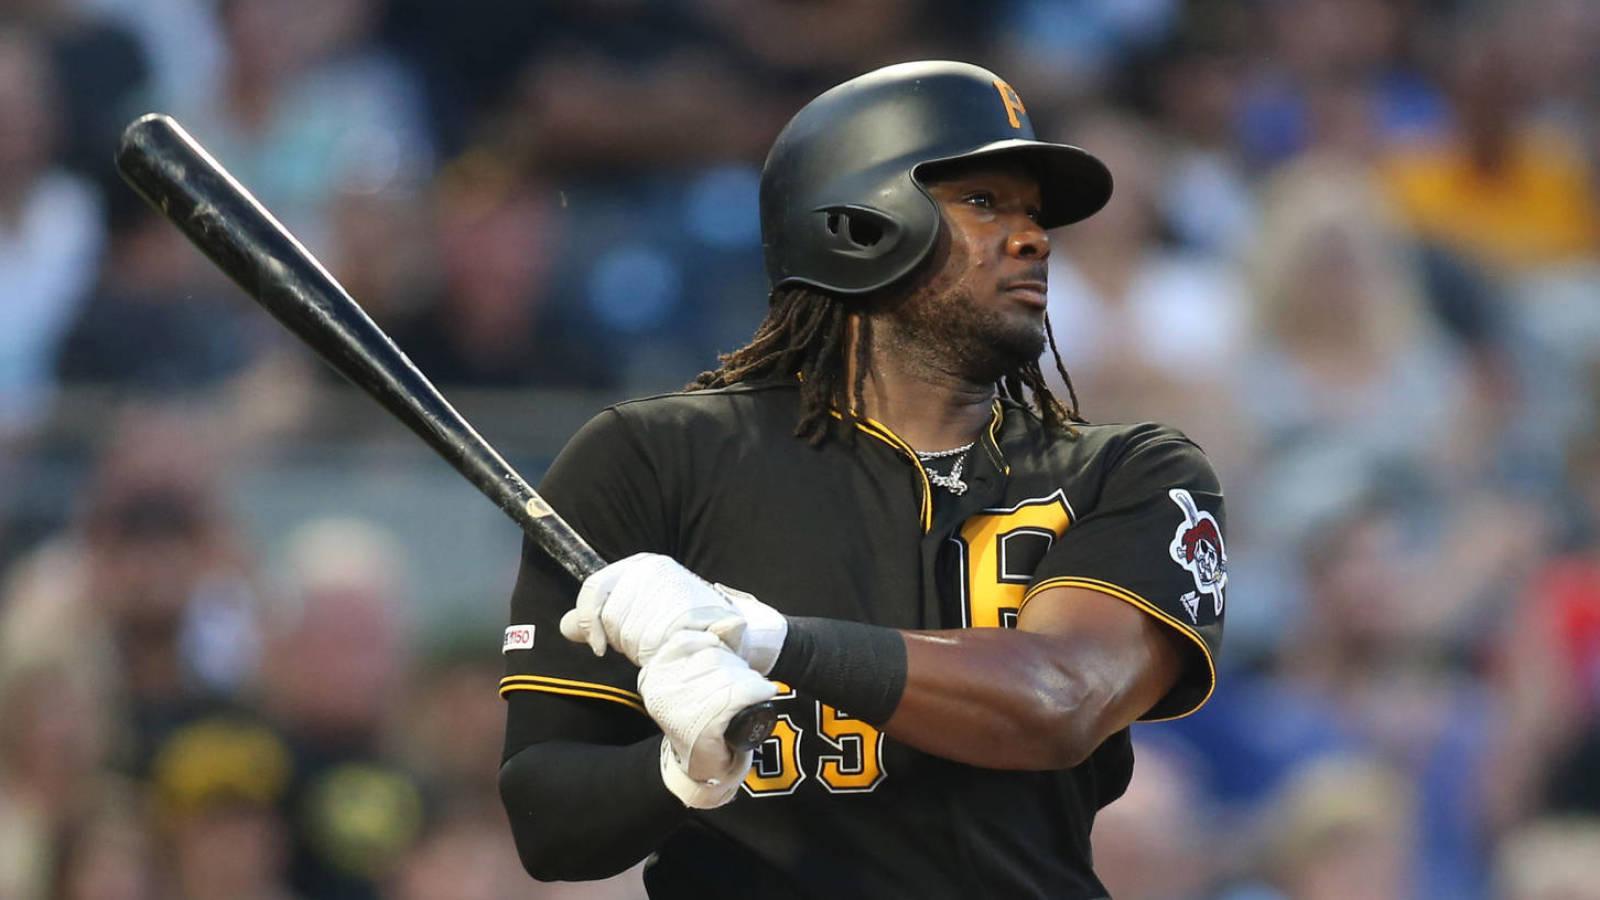 Pirates' Josh Bell emerges as one of the game's biggest